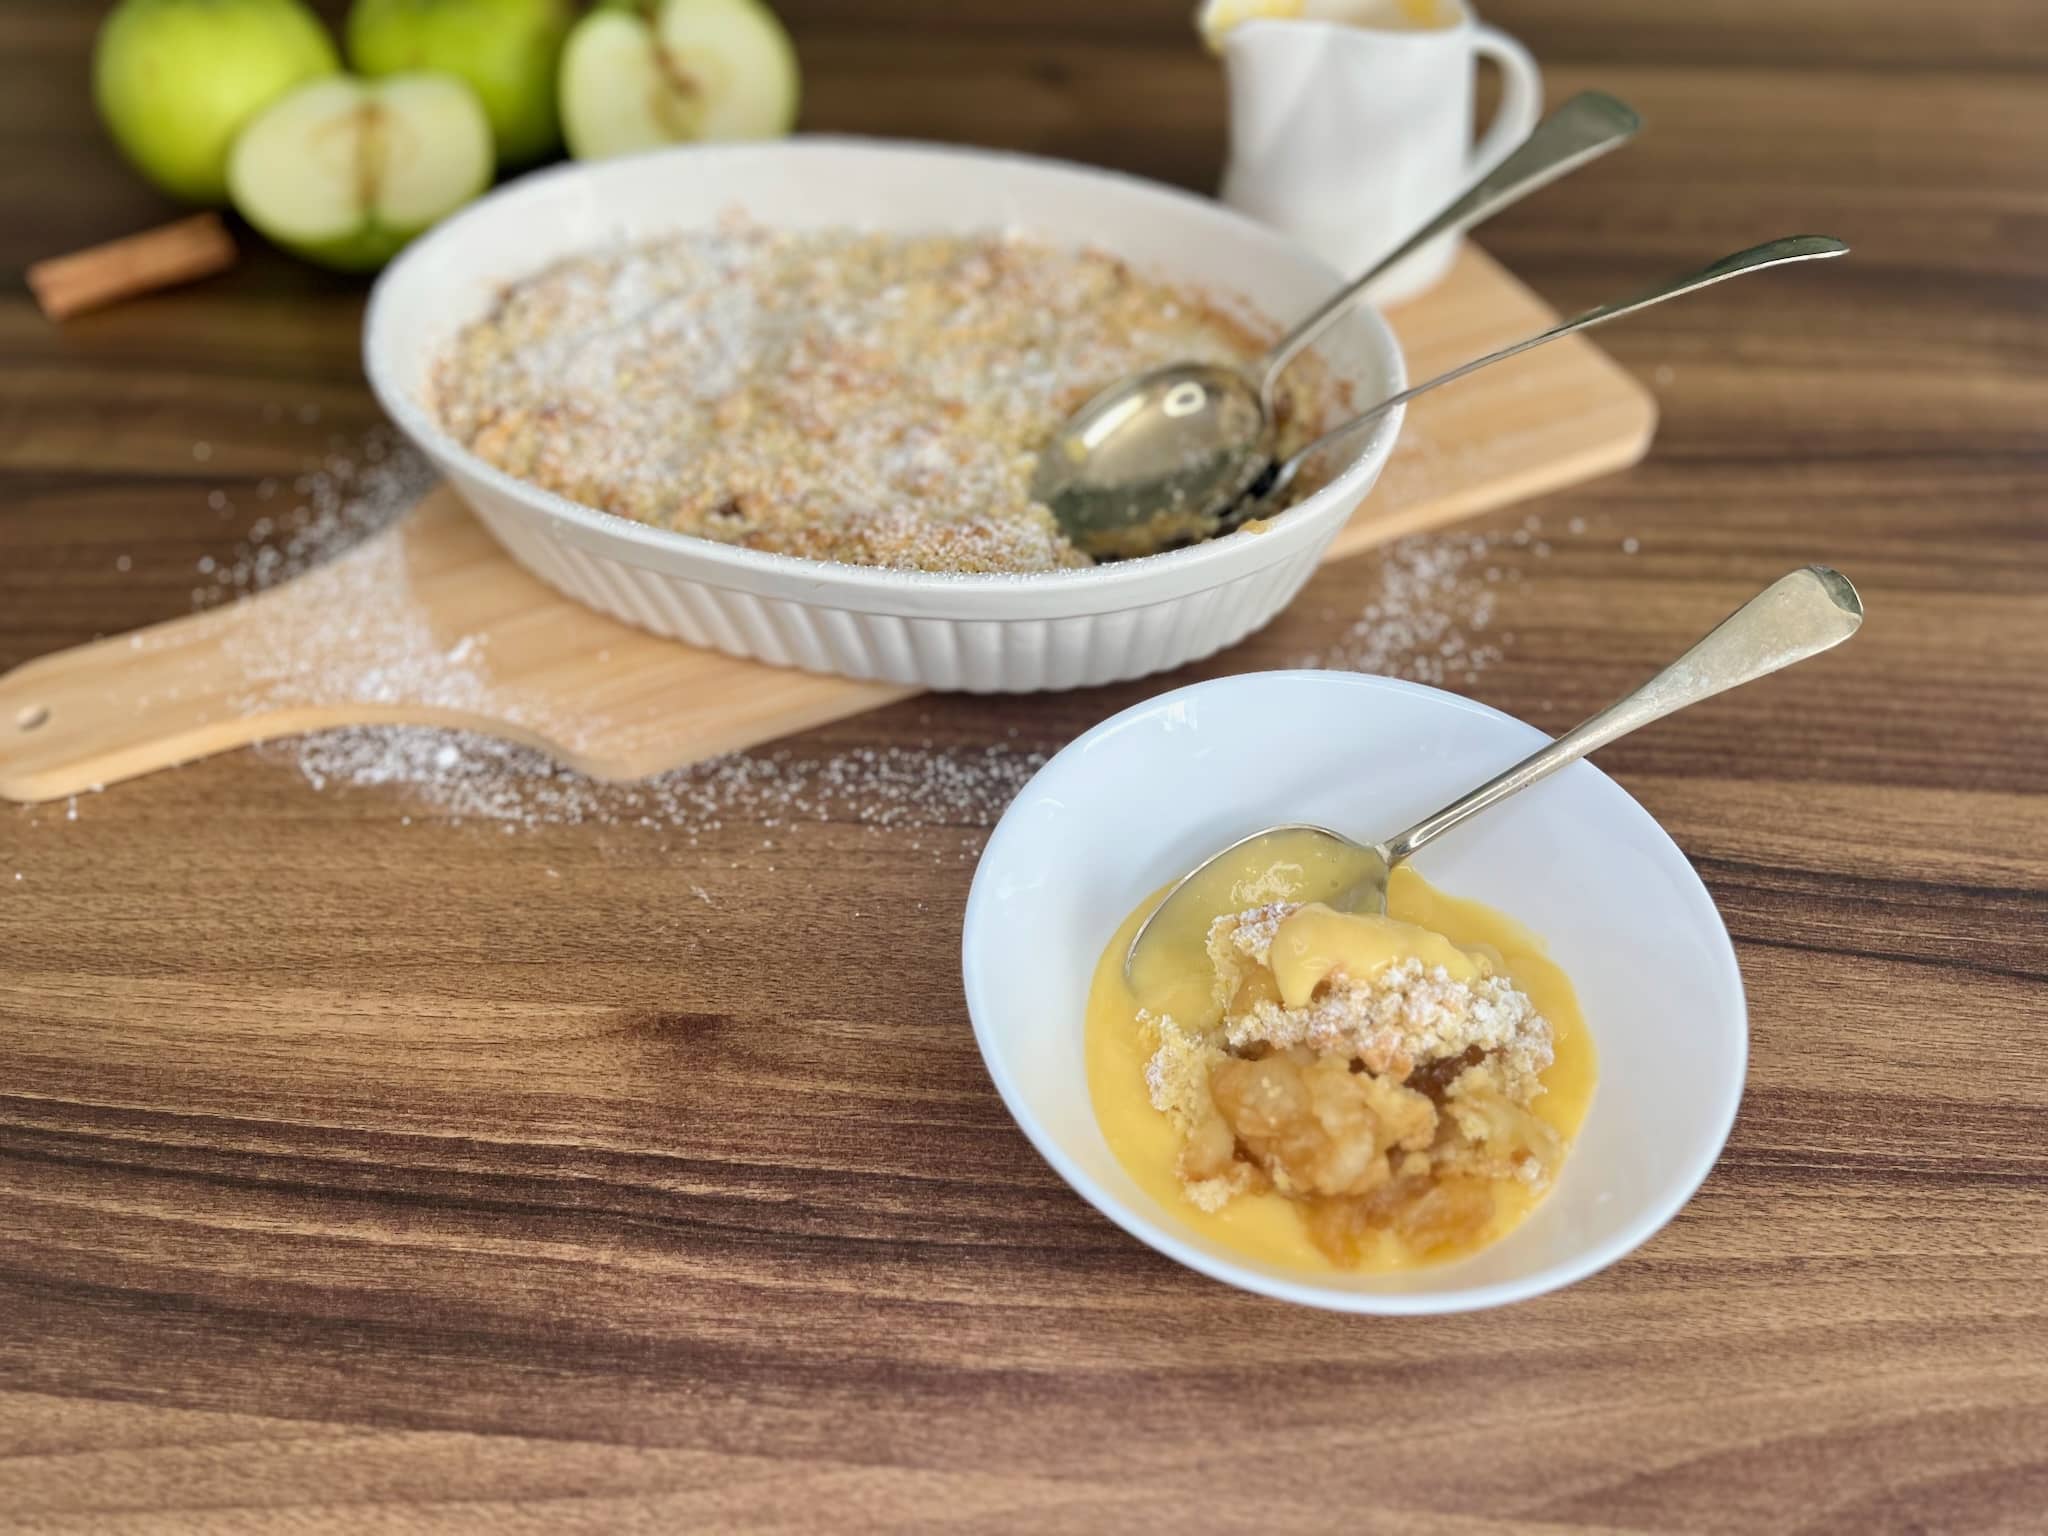 Portion of Apple Crumble with custart in a bowl